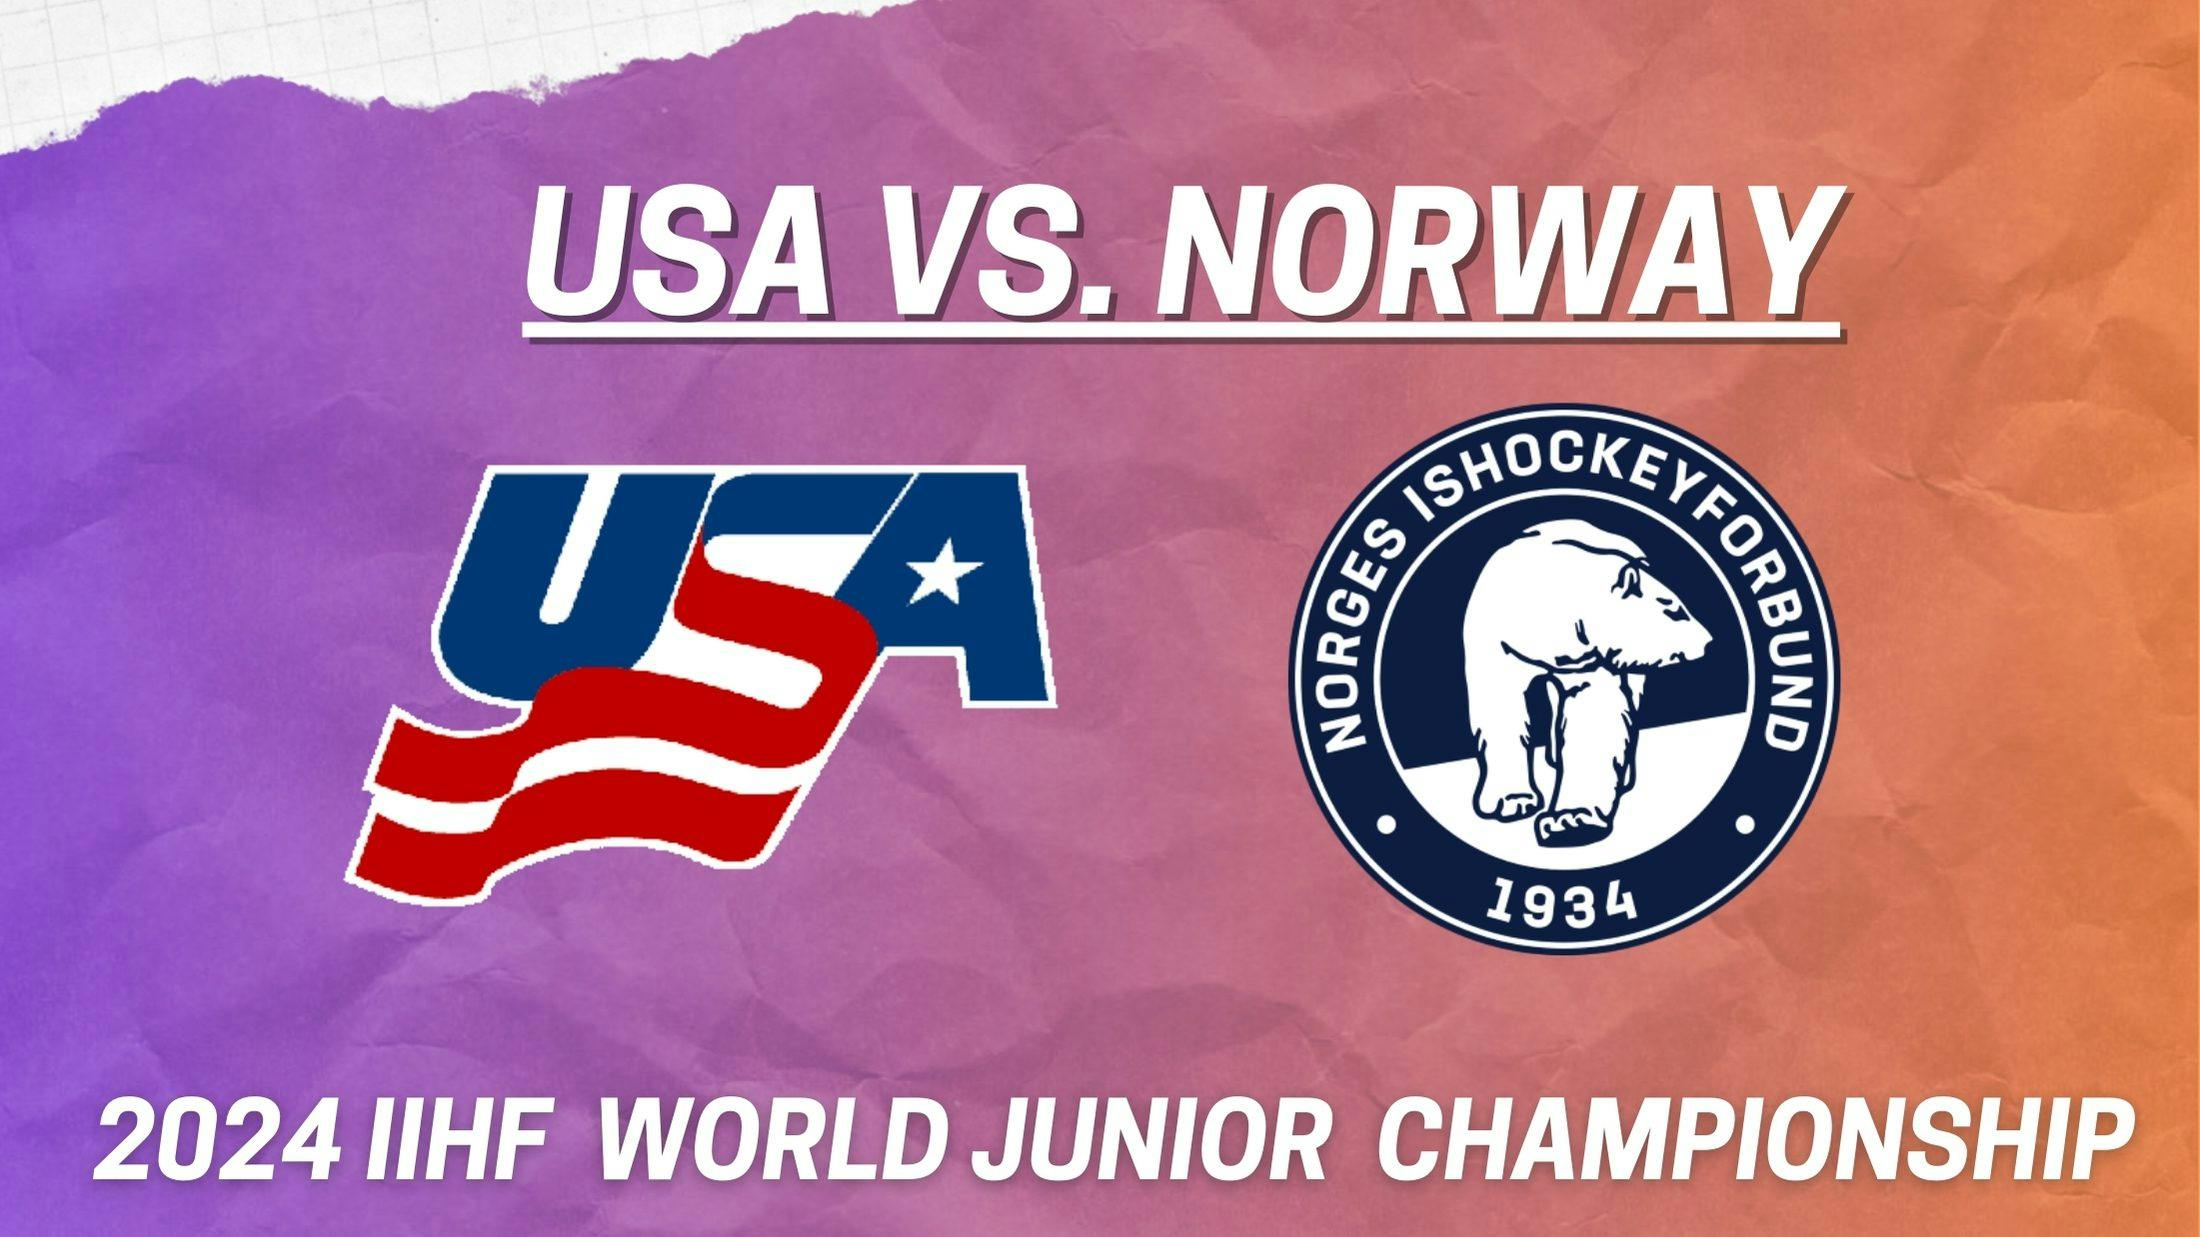 Top standouts from USA vs. Norway game at 2024 World Junior Championship